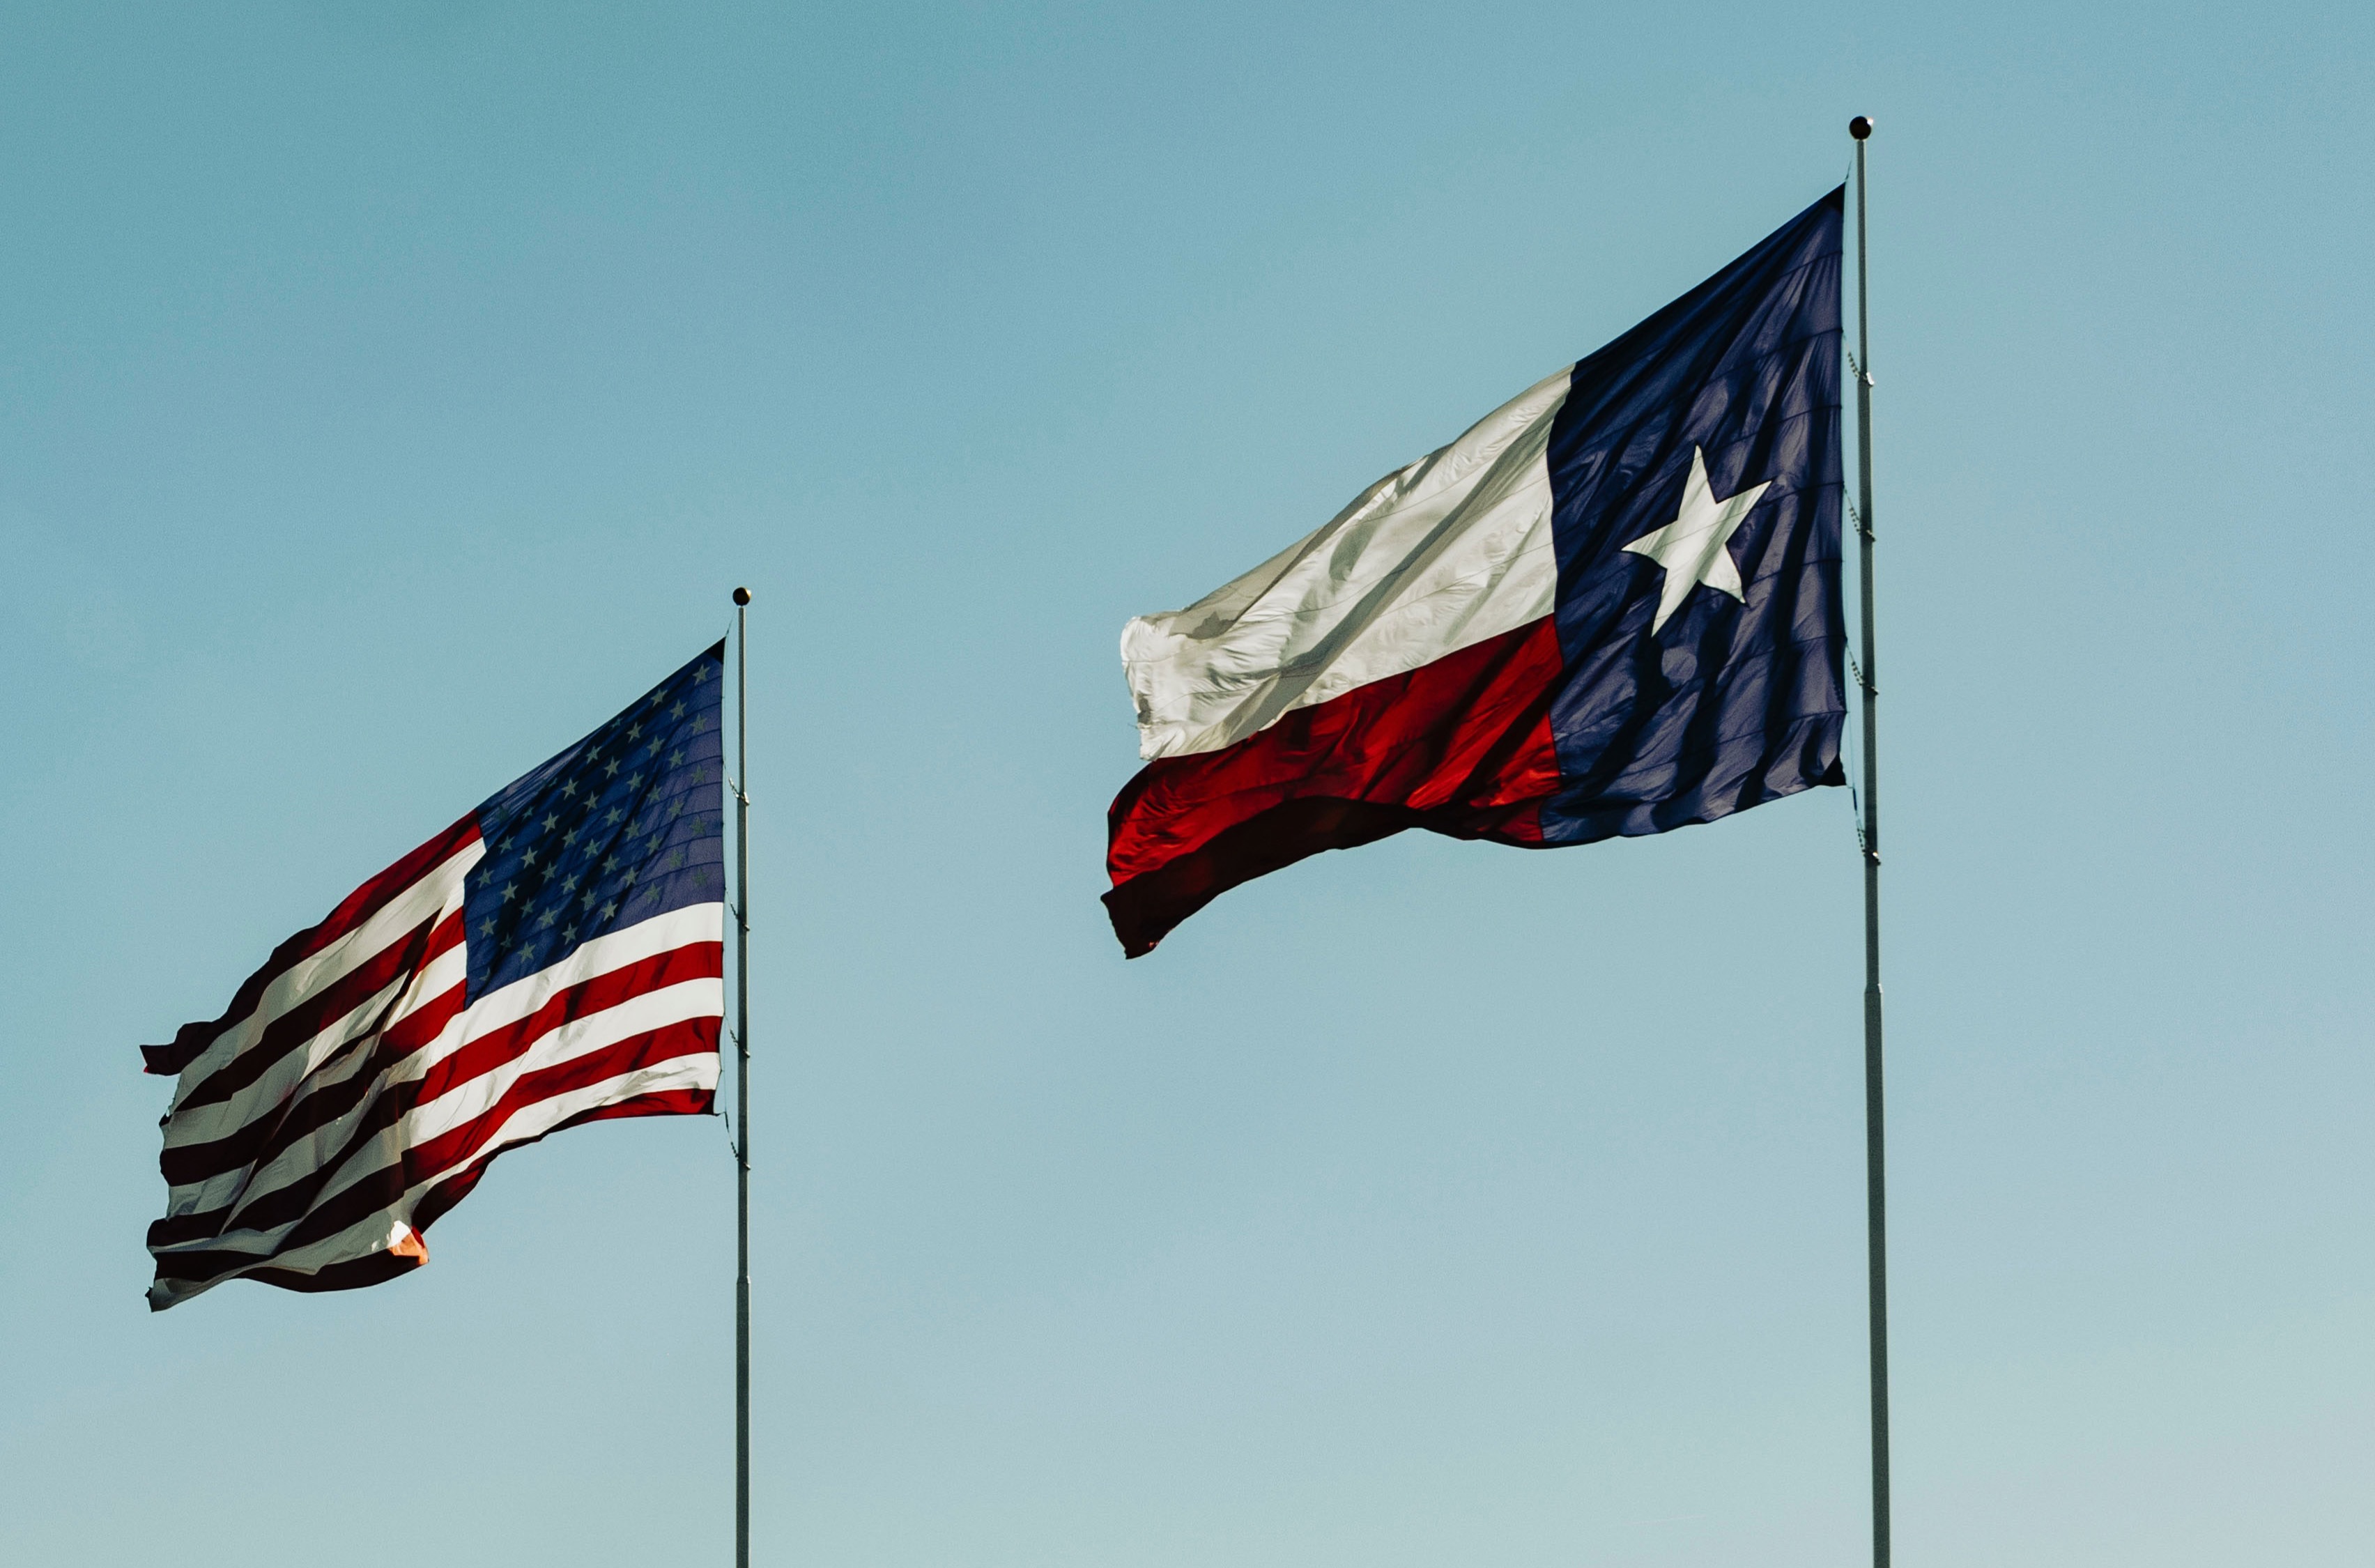 Photo by Talena Reese pexels photo american-flag-and-flag-of-texas-under-blue-sky-10471017